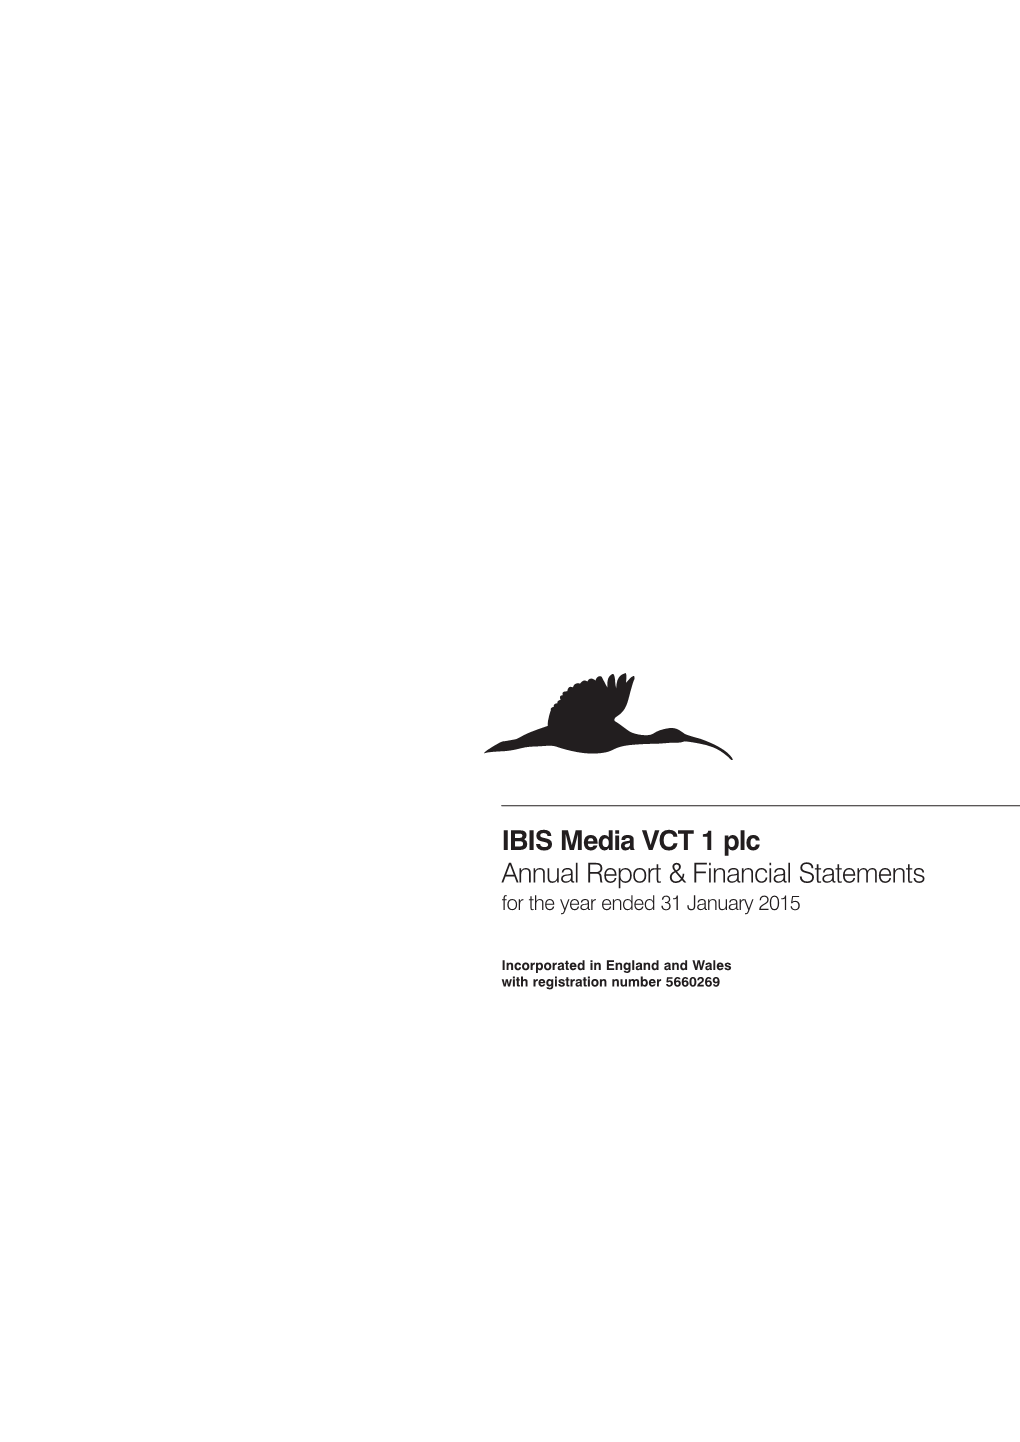 IBIS Media VCT 1 Plc Annual Report & Financial Statements